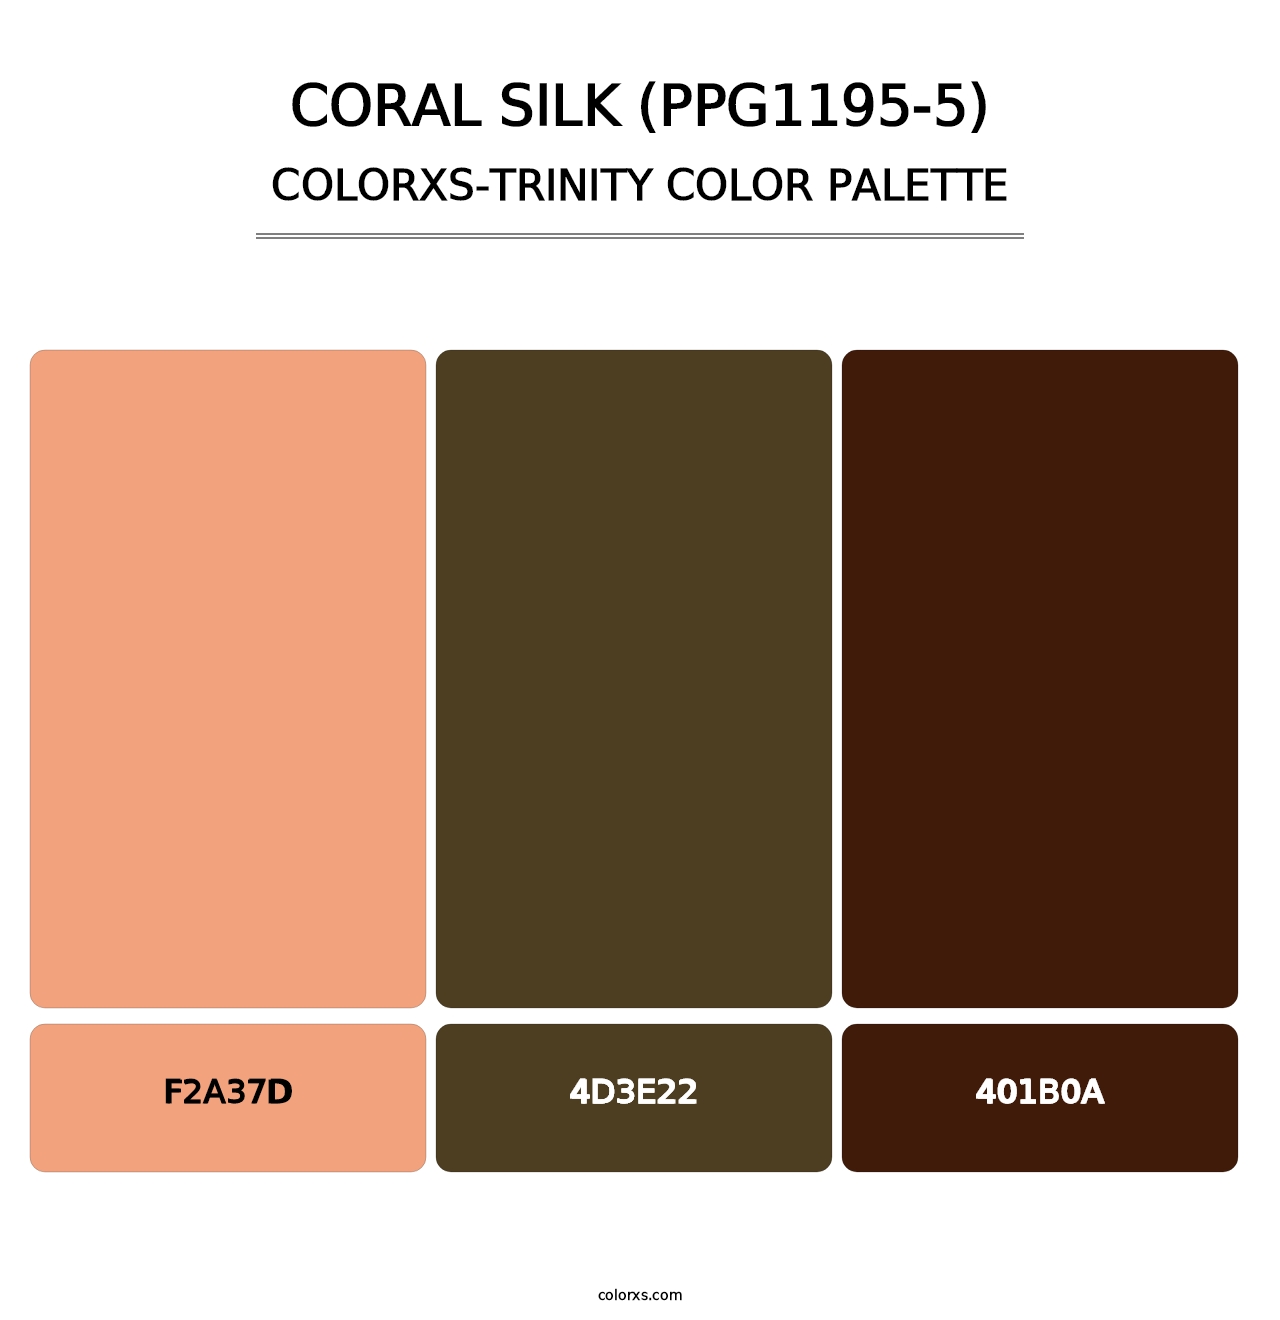 Coral Silk (PPG1195-5) - Colorxs Trinity Palette